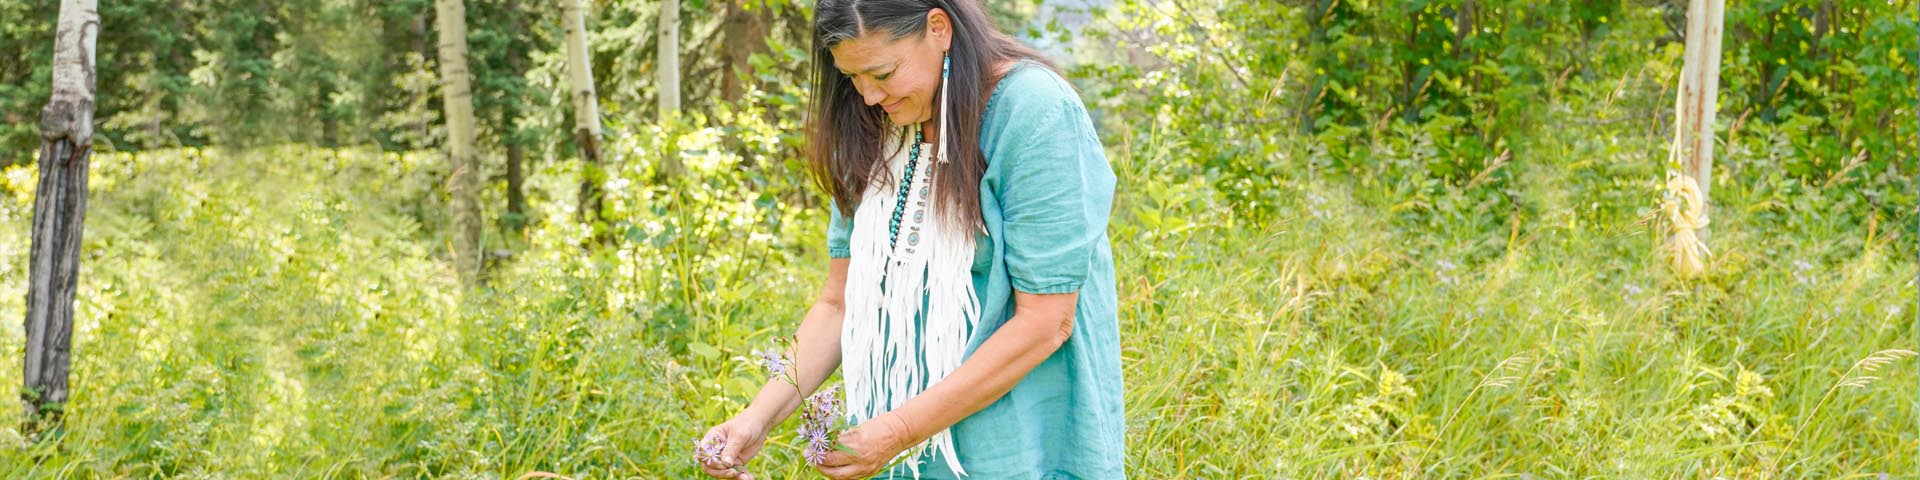 An Indigenous woman picks plants in the forest of Jasper National Park.